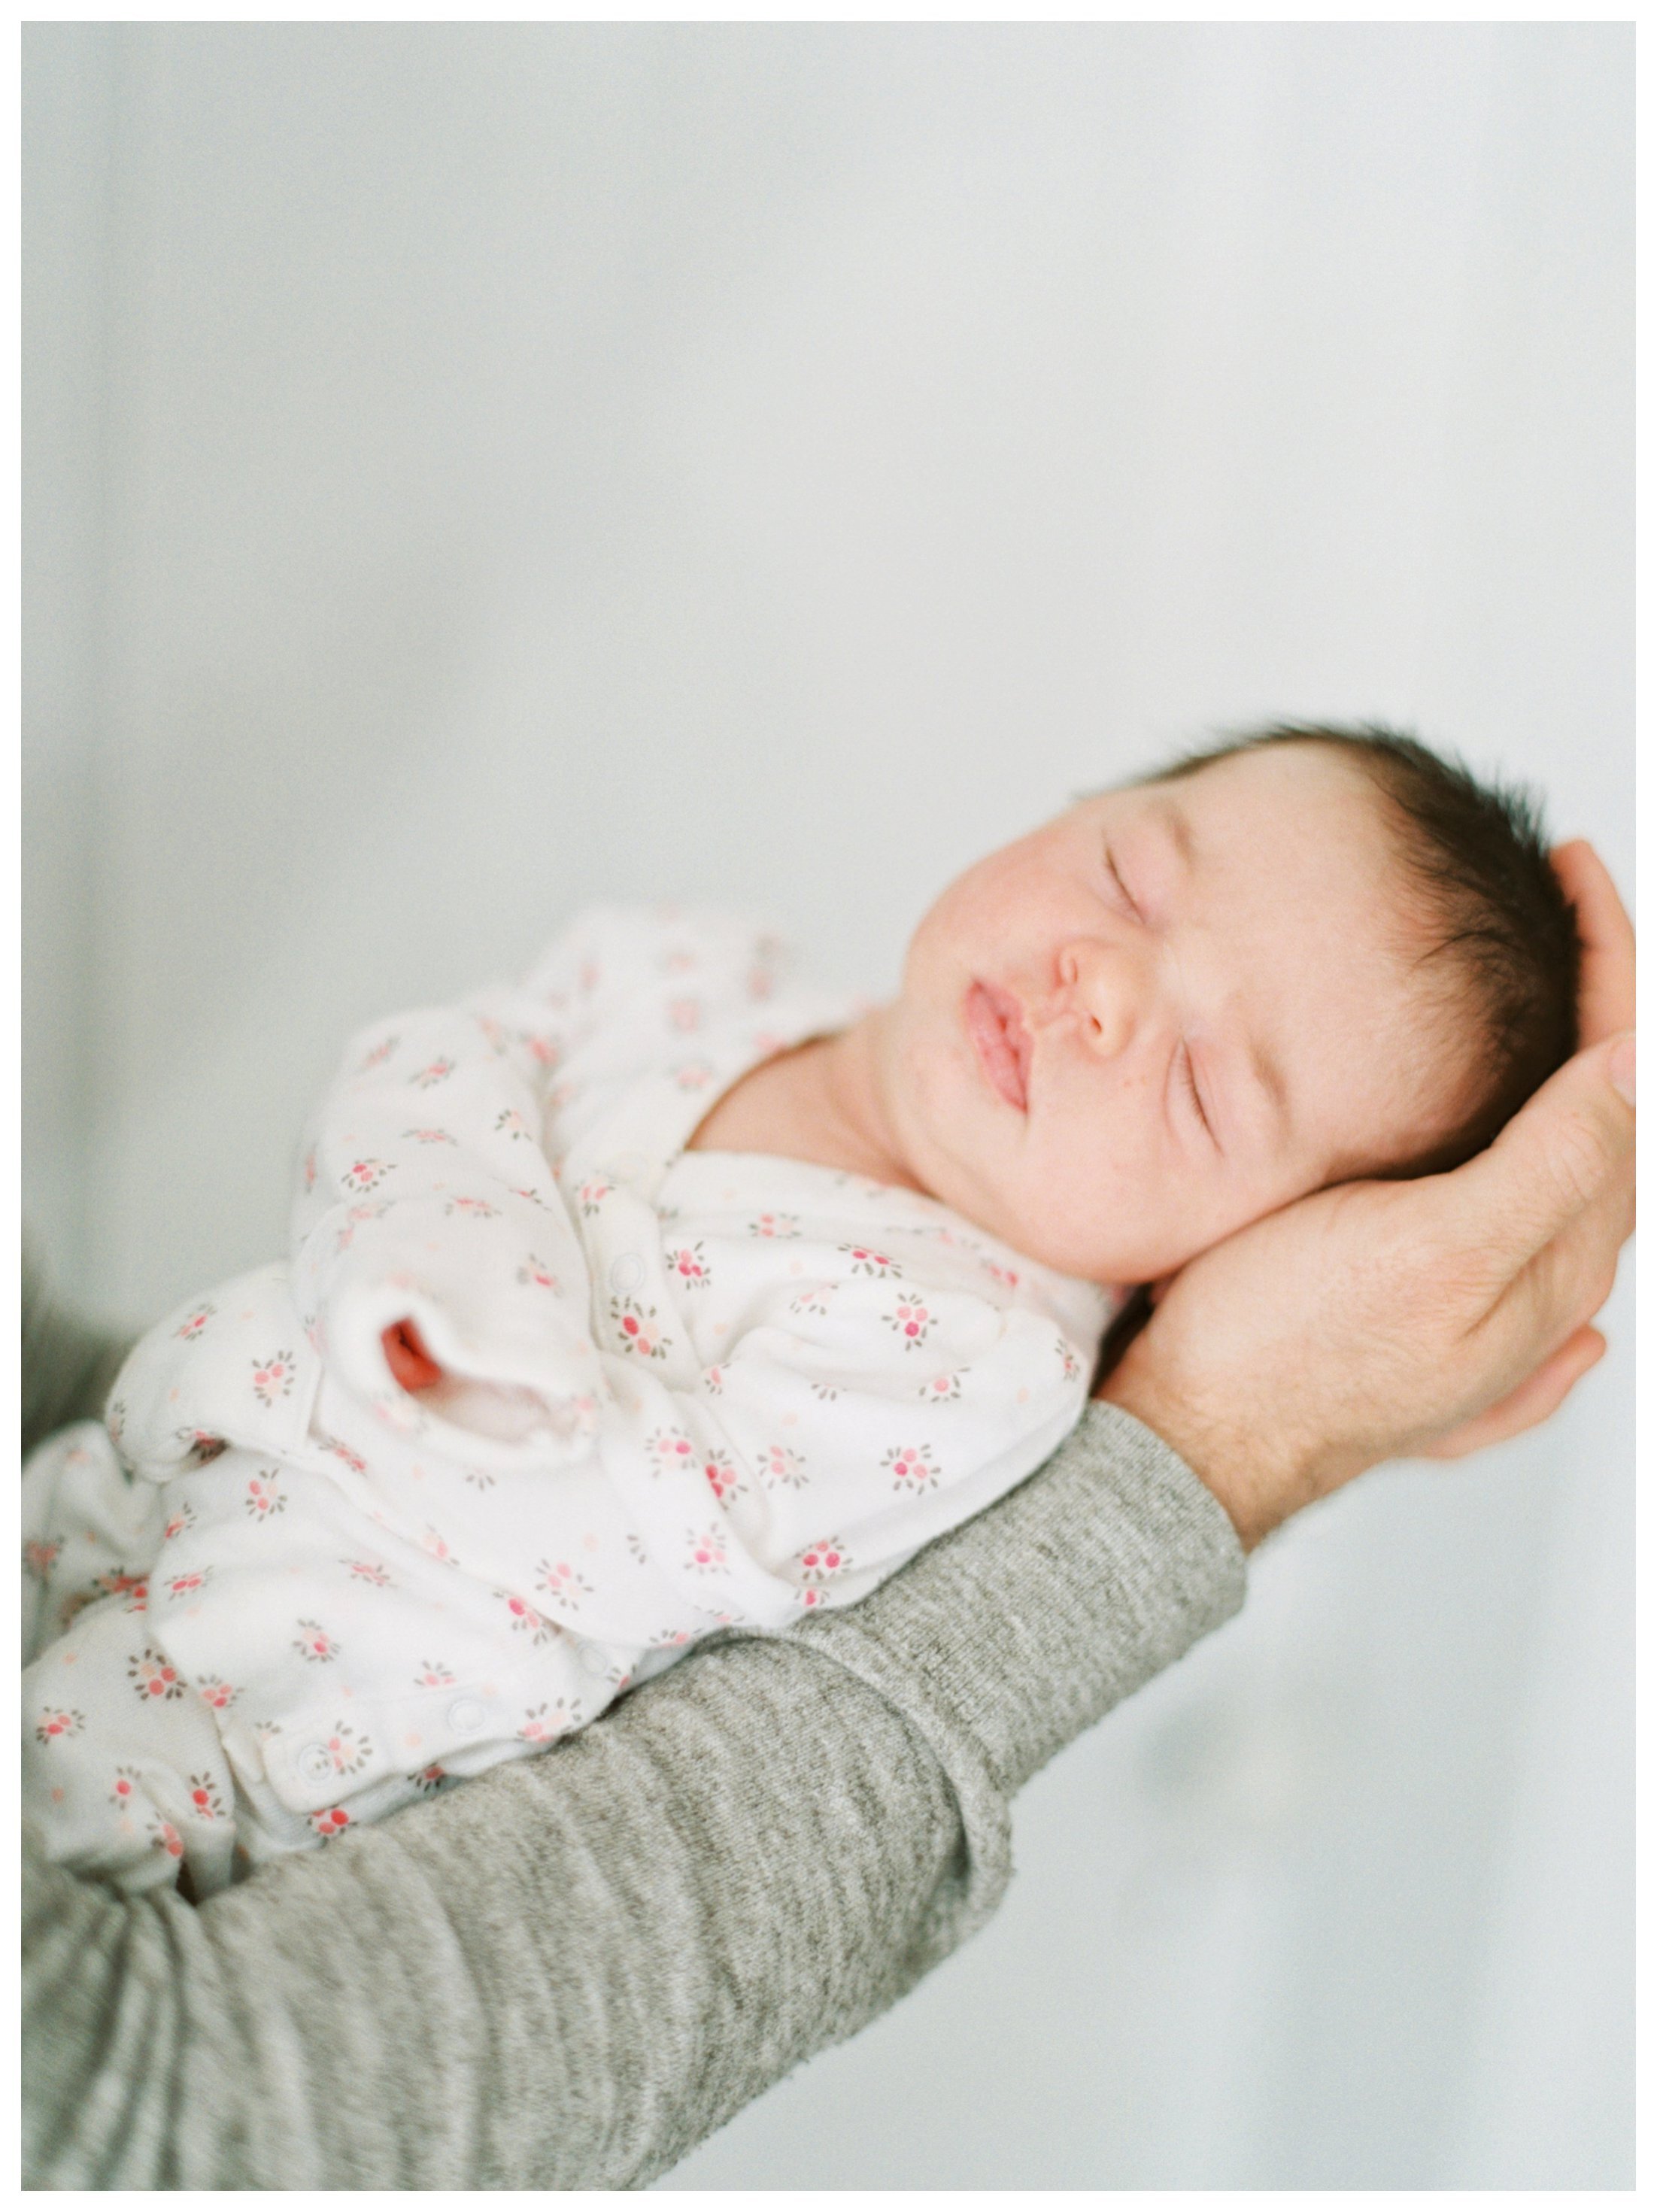 Downtown Indy Family Newborn Lifestyle Session_0023.jpg